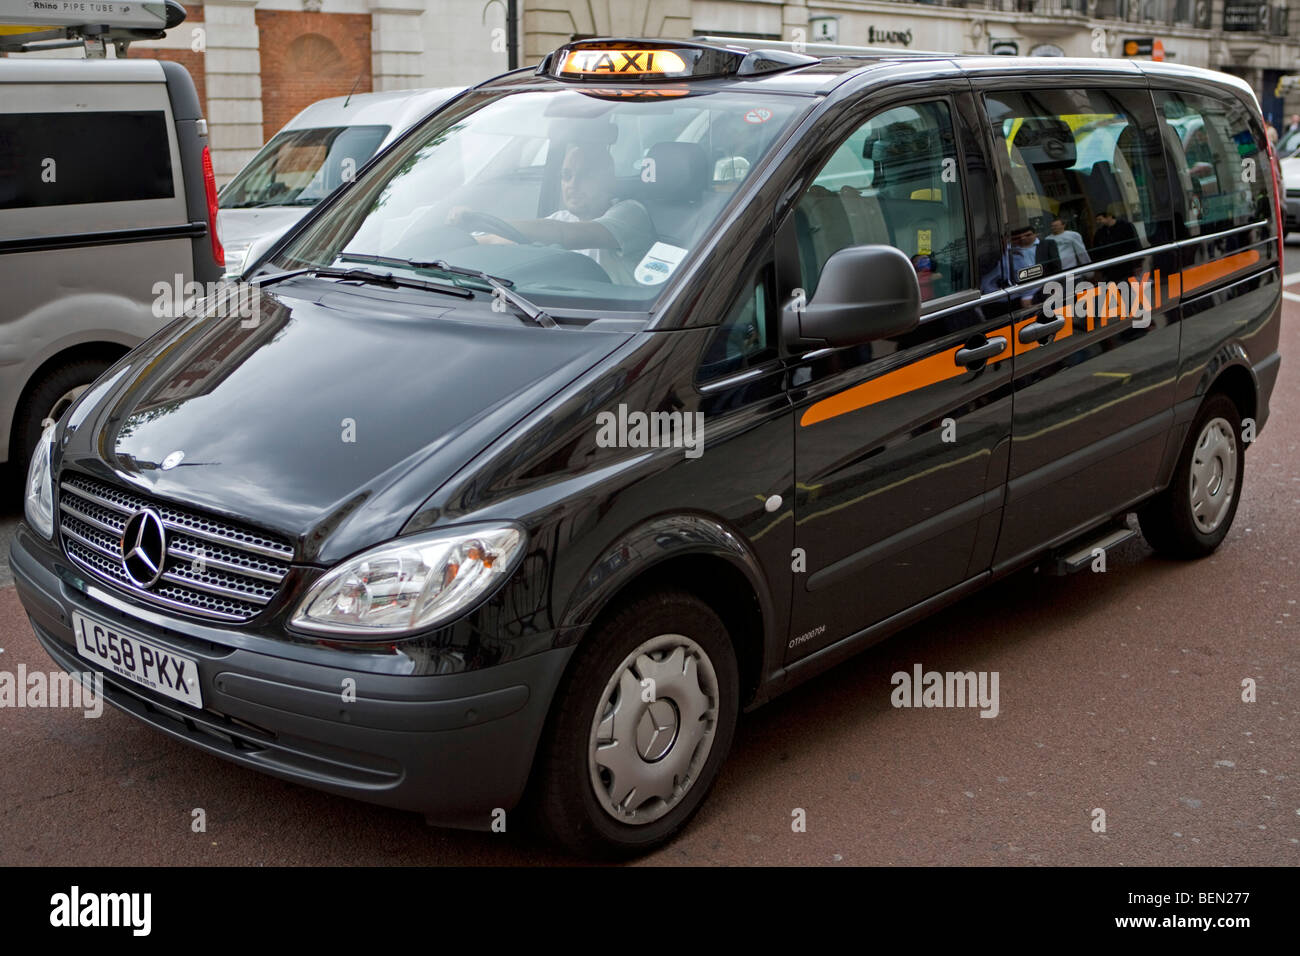 Mercedes Black Taxi, Piccadilly, London, England Stock Photo